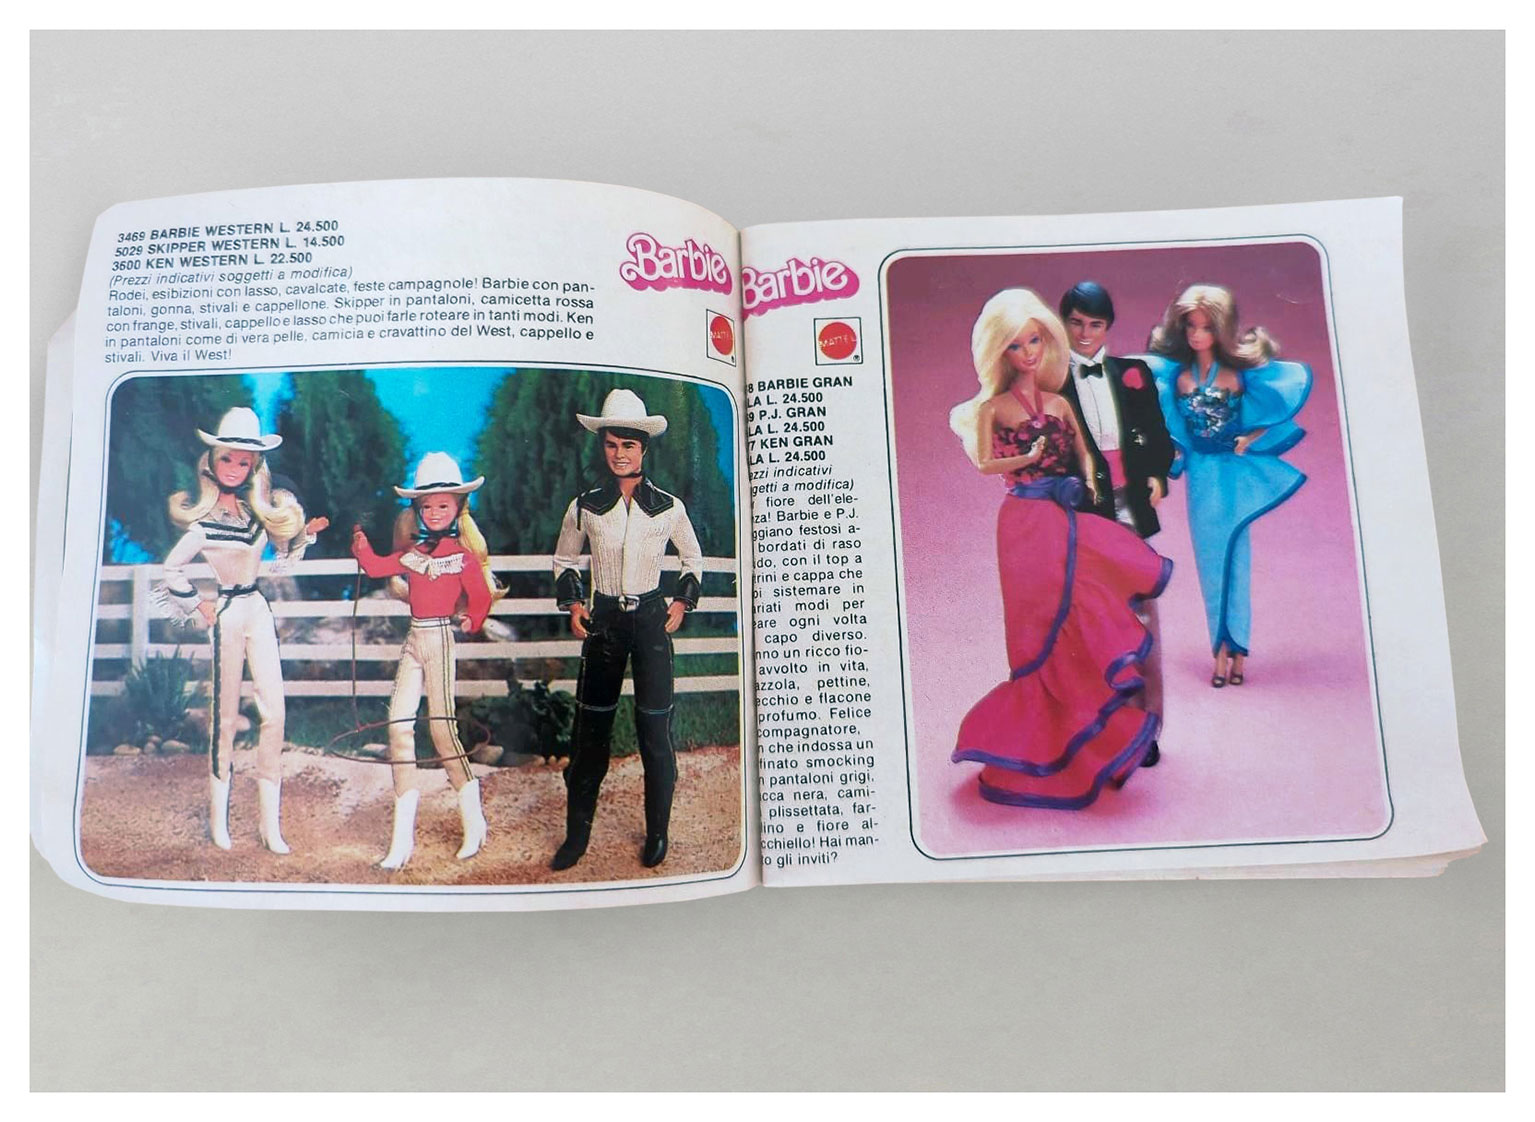 From 1983 Italian Barbie booklet